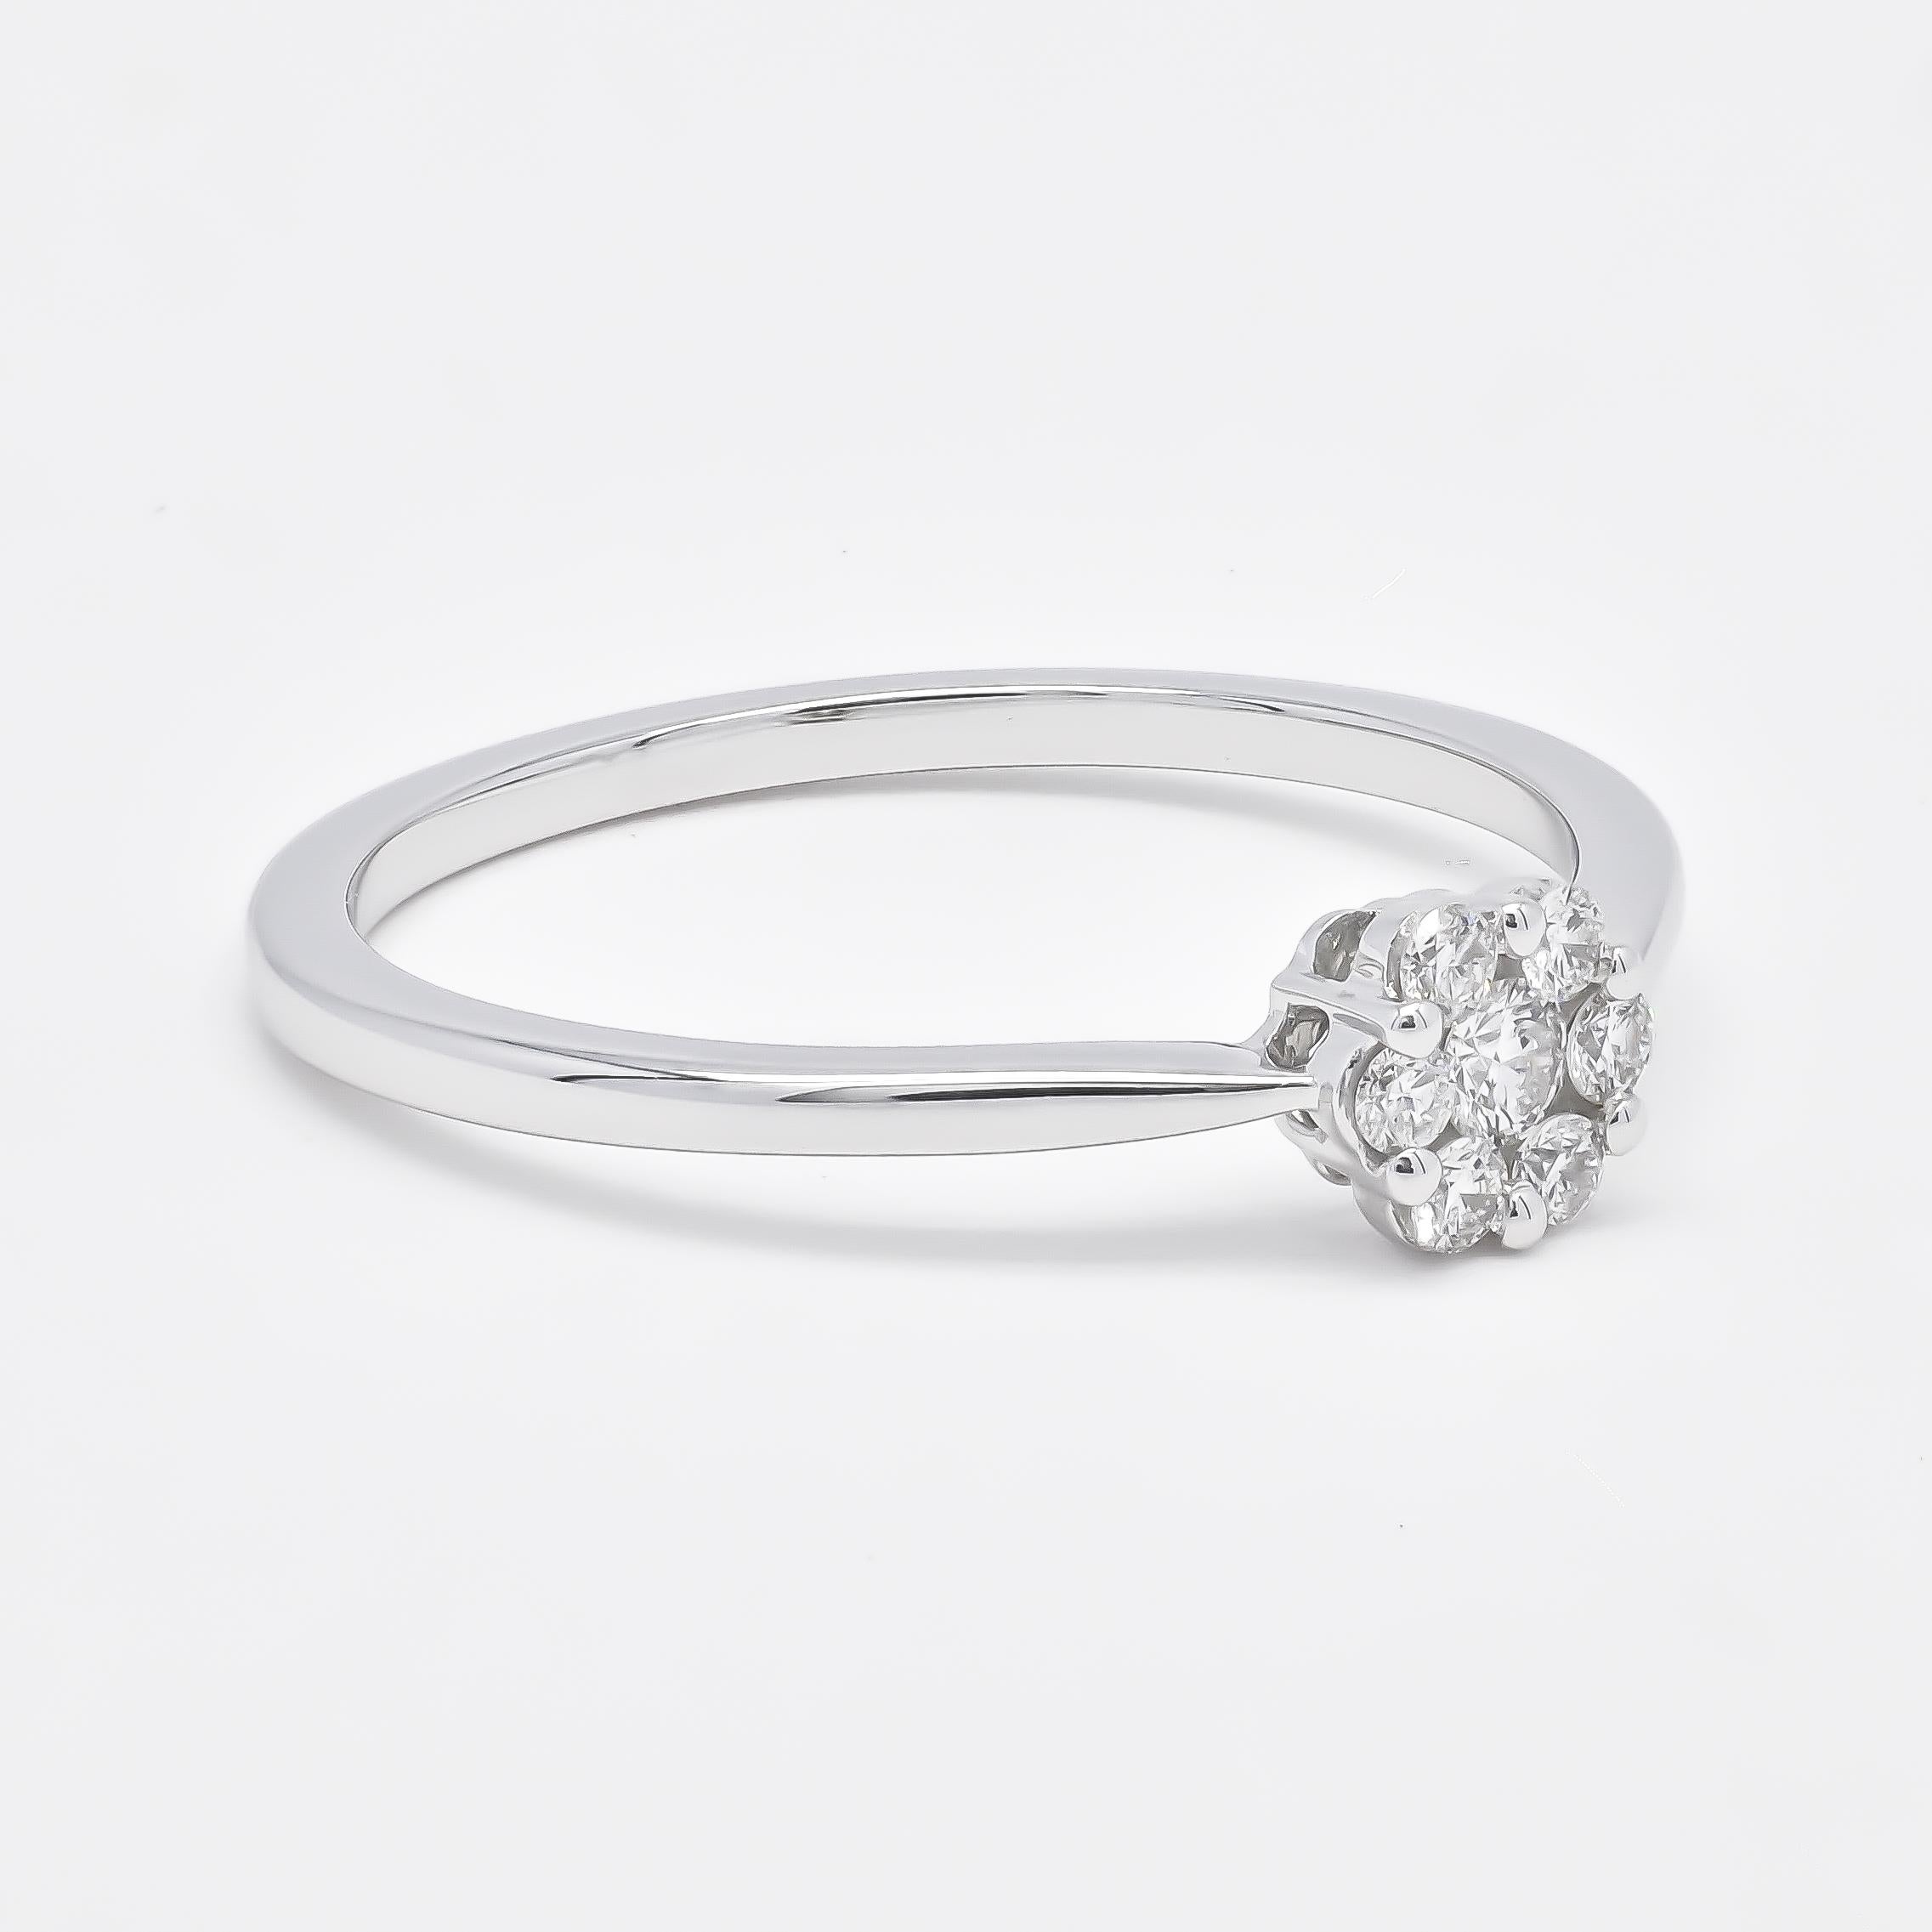 Minimalist simple cluster set diamond white ring perfect for everyday wear or a gifting item!


Metal: 18kt White Gold 
Gemstone: Natural Diamonds
Shape: Round Brilliant
Total Carat Weight: 0.16ct
Number of Gemstones: 7
Setting Style: